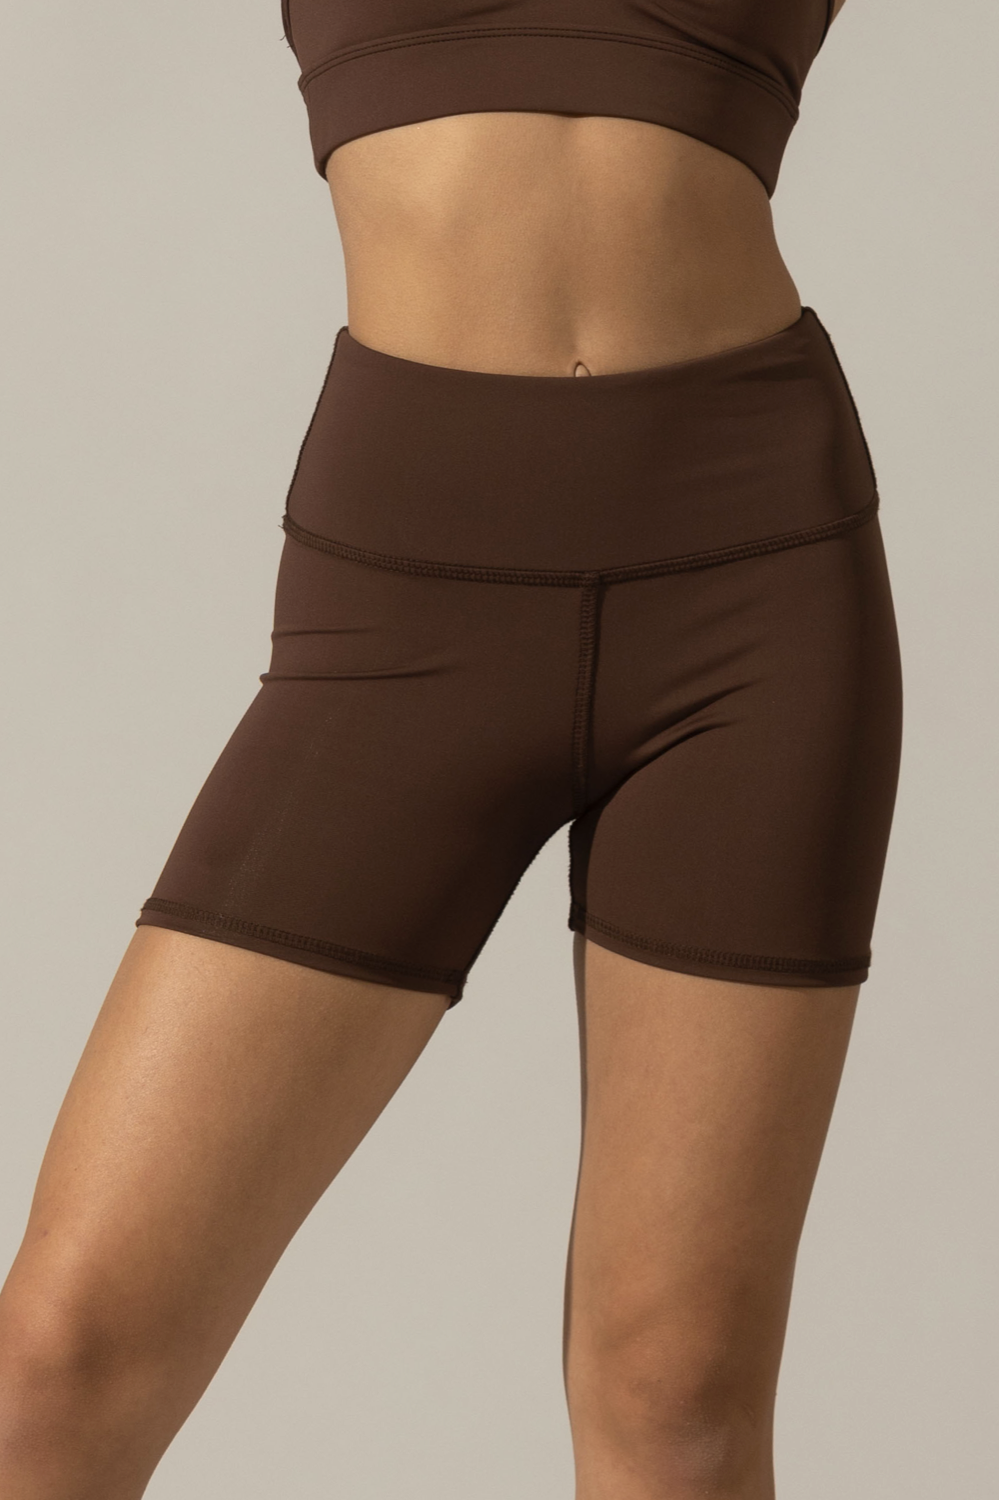 Tiger Friday Online Shop for Triker Shorts - Cocoa Dancewear - View : 1